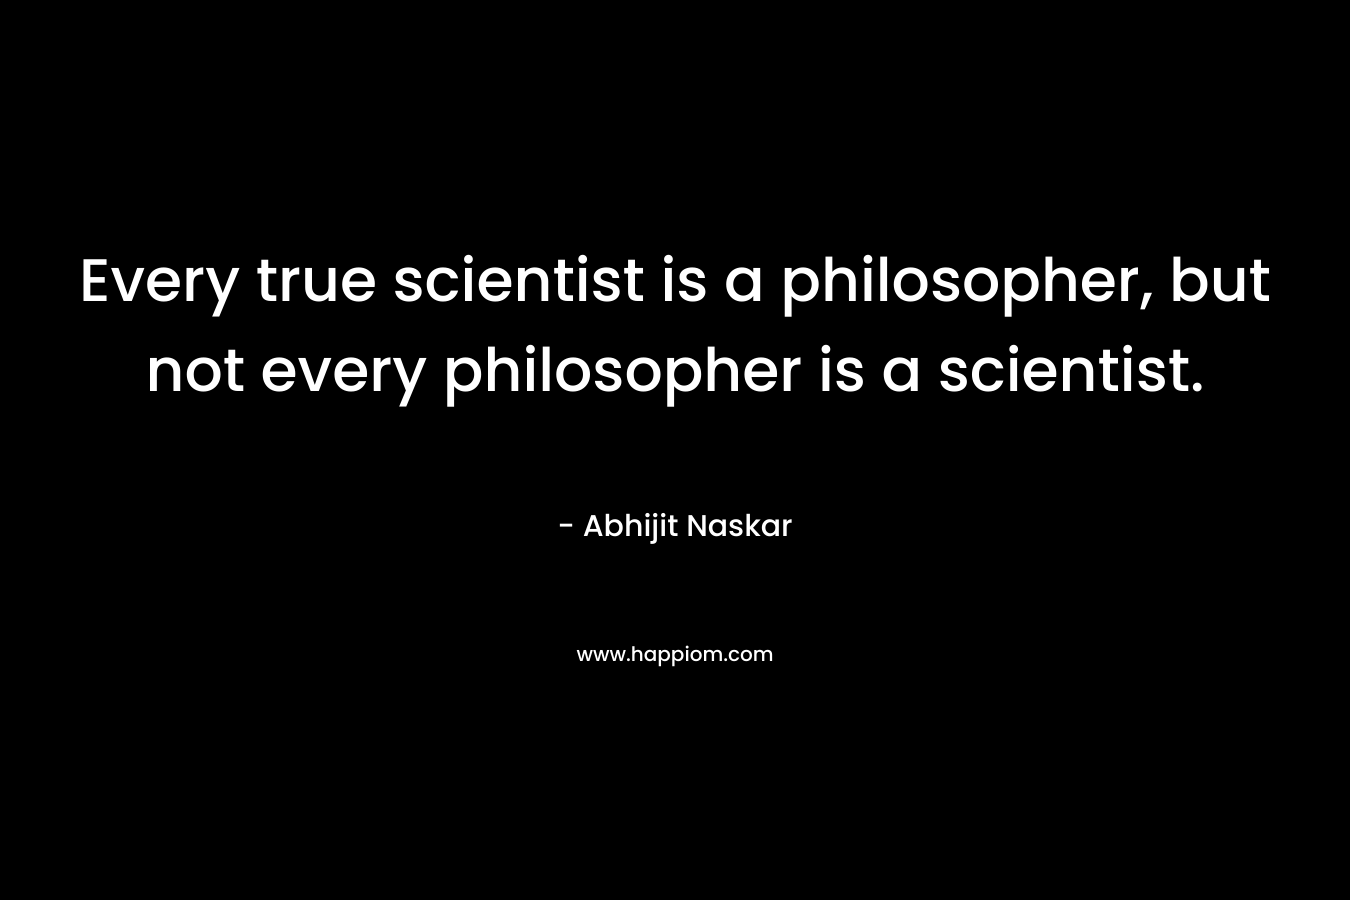 Every true scientist is a philosopher, but not every philosopher is a scientist.